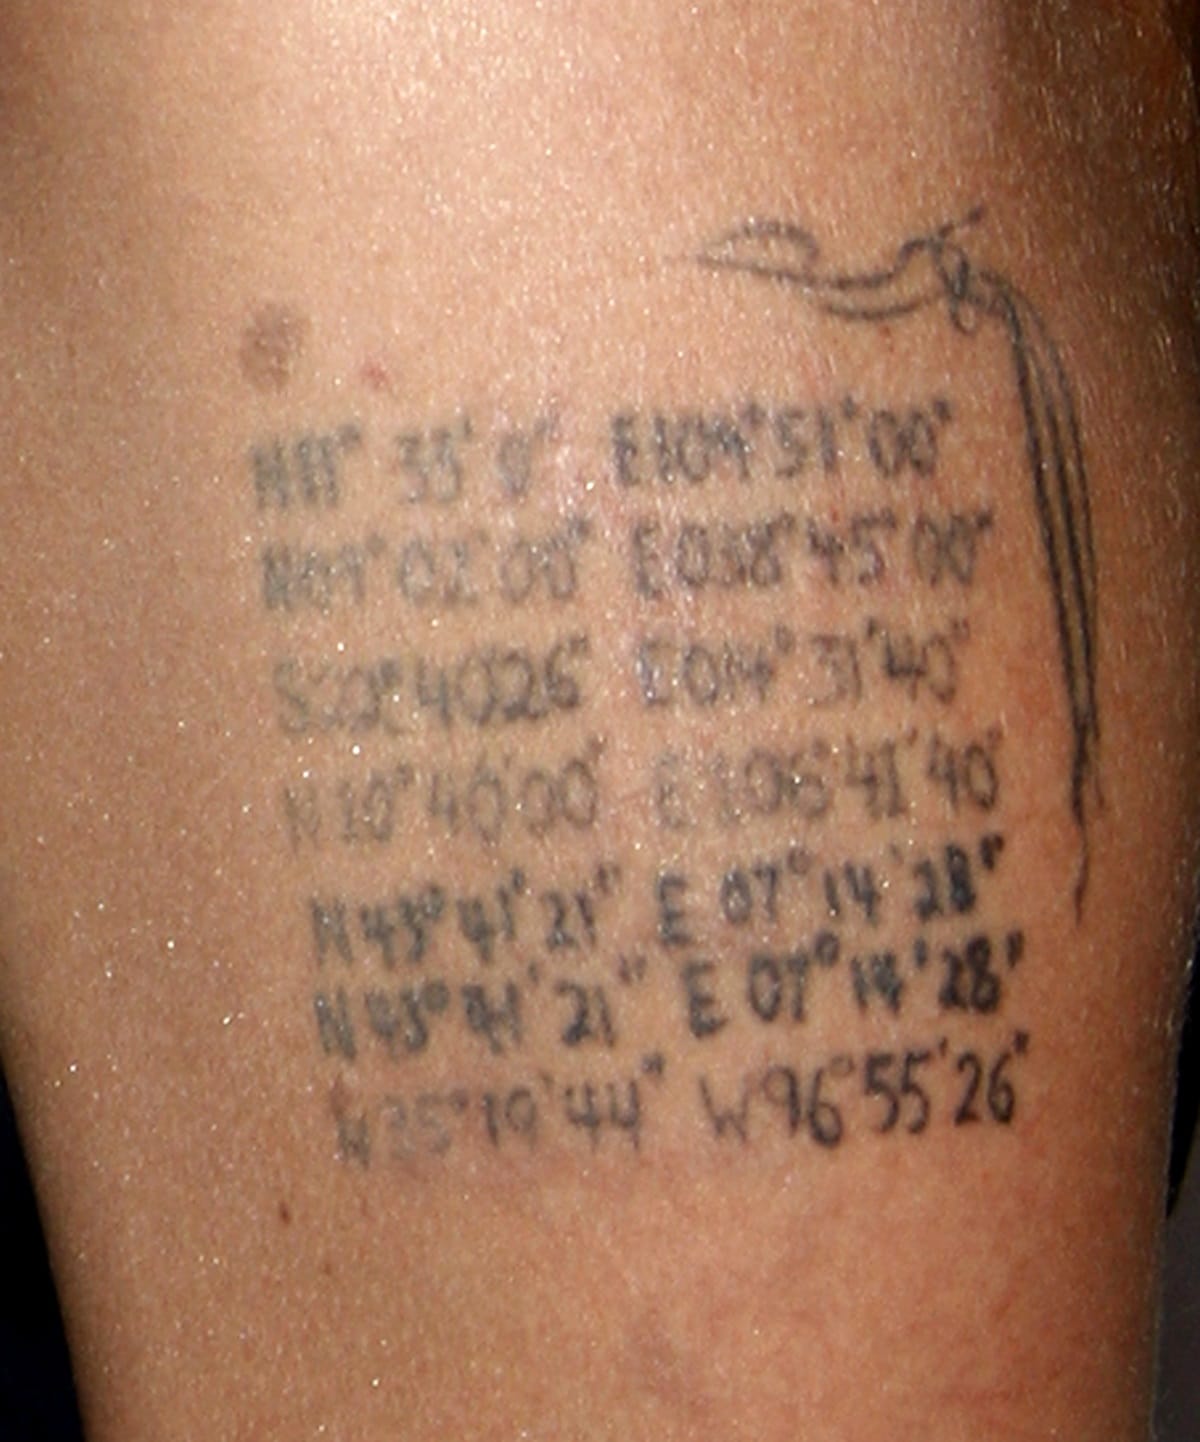 Angelina Jolie replaced the dragon tattoo on her left arm with geographical coordinates representing the birthplaces of her children, adding a seventh location for her then-husband Brad Pitt's birthplace in Shawnee, Oklahoma, with the tattoo's significance being easily recognizable due to the latitude and longitude markers